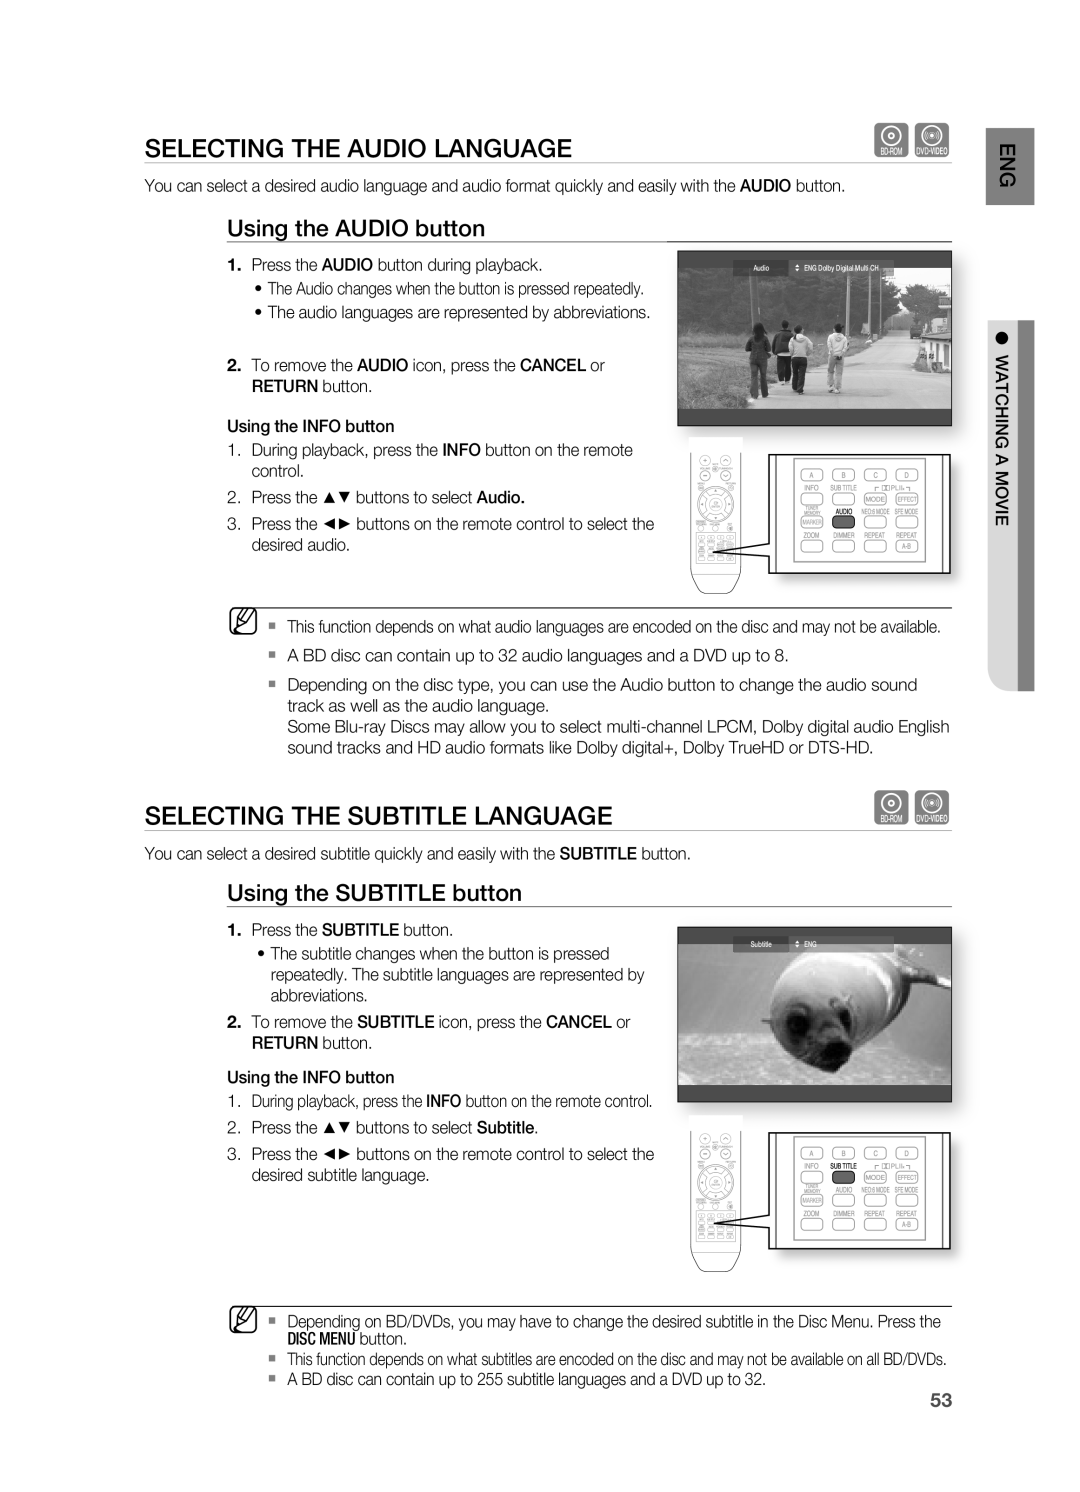 Samsung HT-BD2S manual SELECTIng THE AUDIO LAngUAgE, SELECTIng THE SUBTITLE LAngUAgE, Using the AUDIO button 